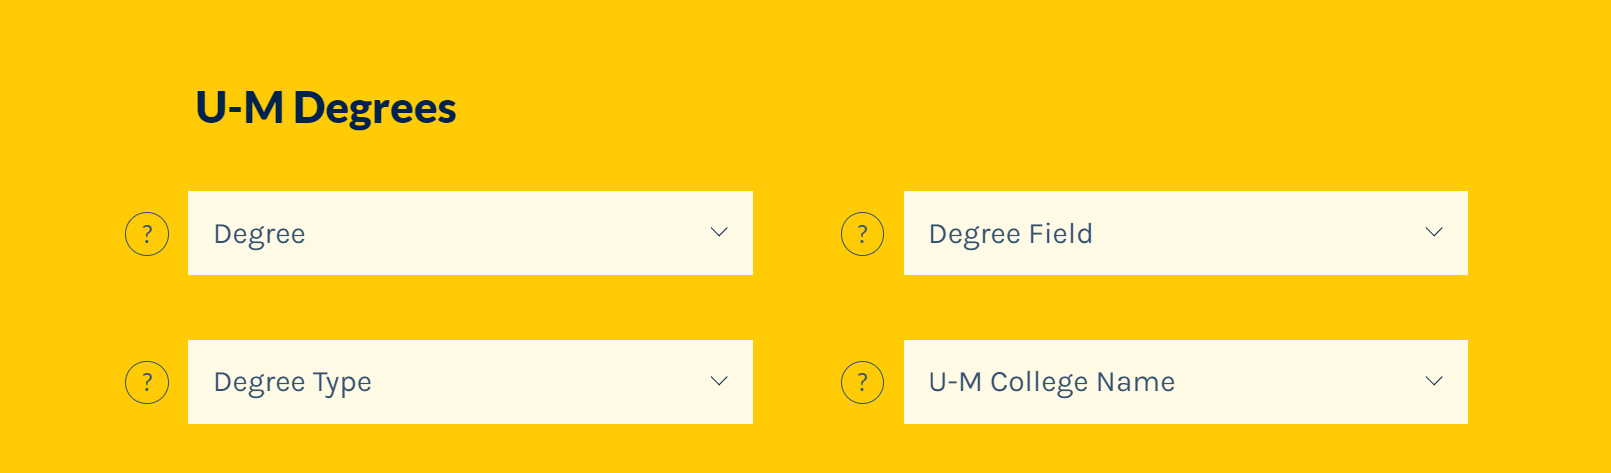 Screen shot of the U-M Degrees section of the database search page